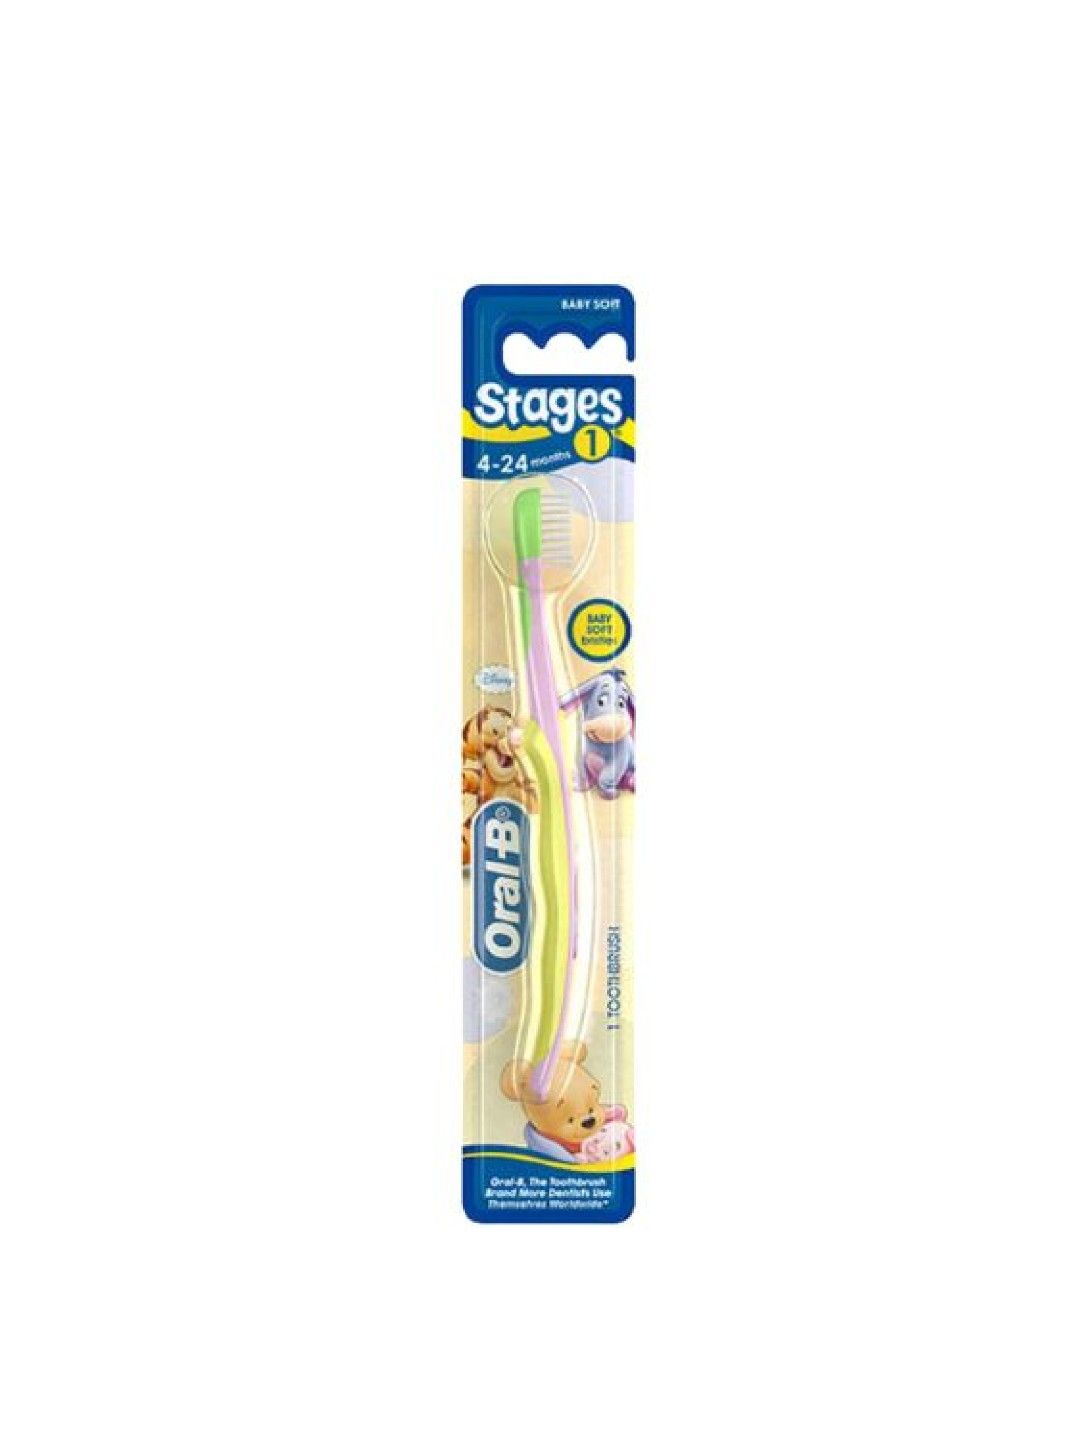 Oral-B Stages 1 Toothbrush (4-24 months)